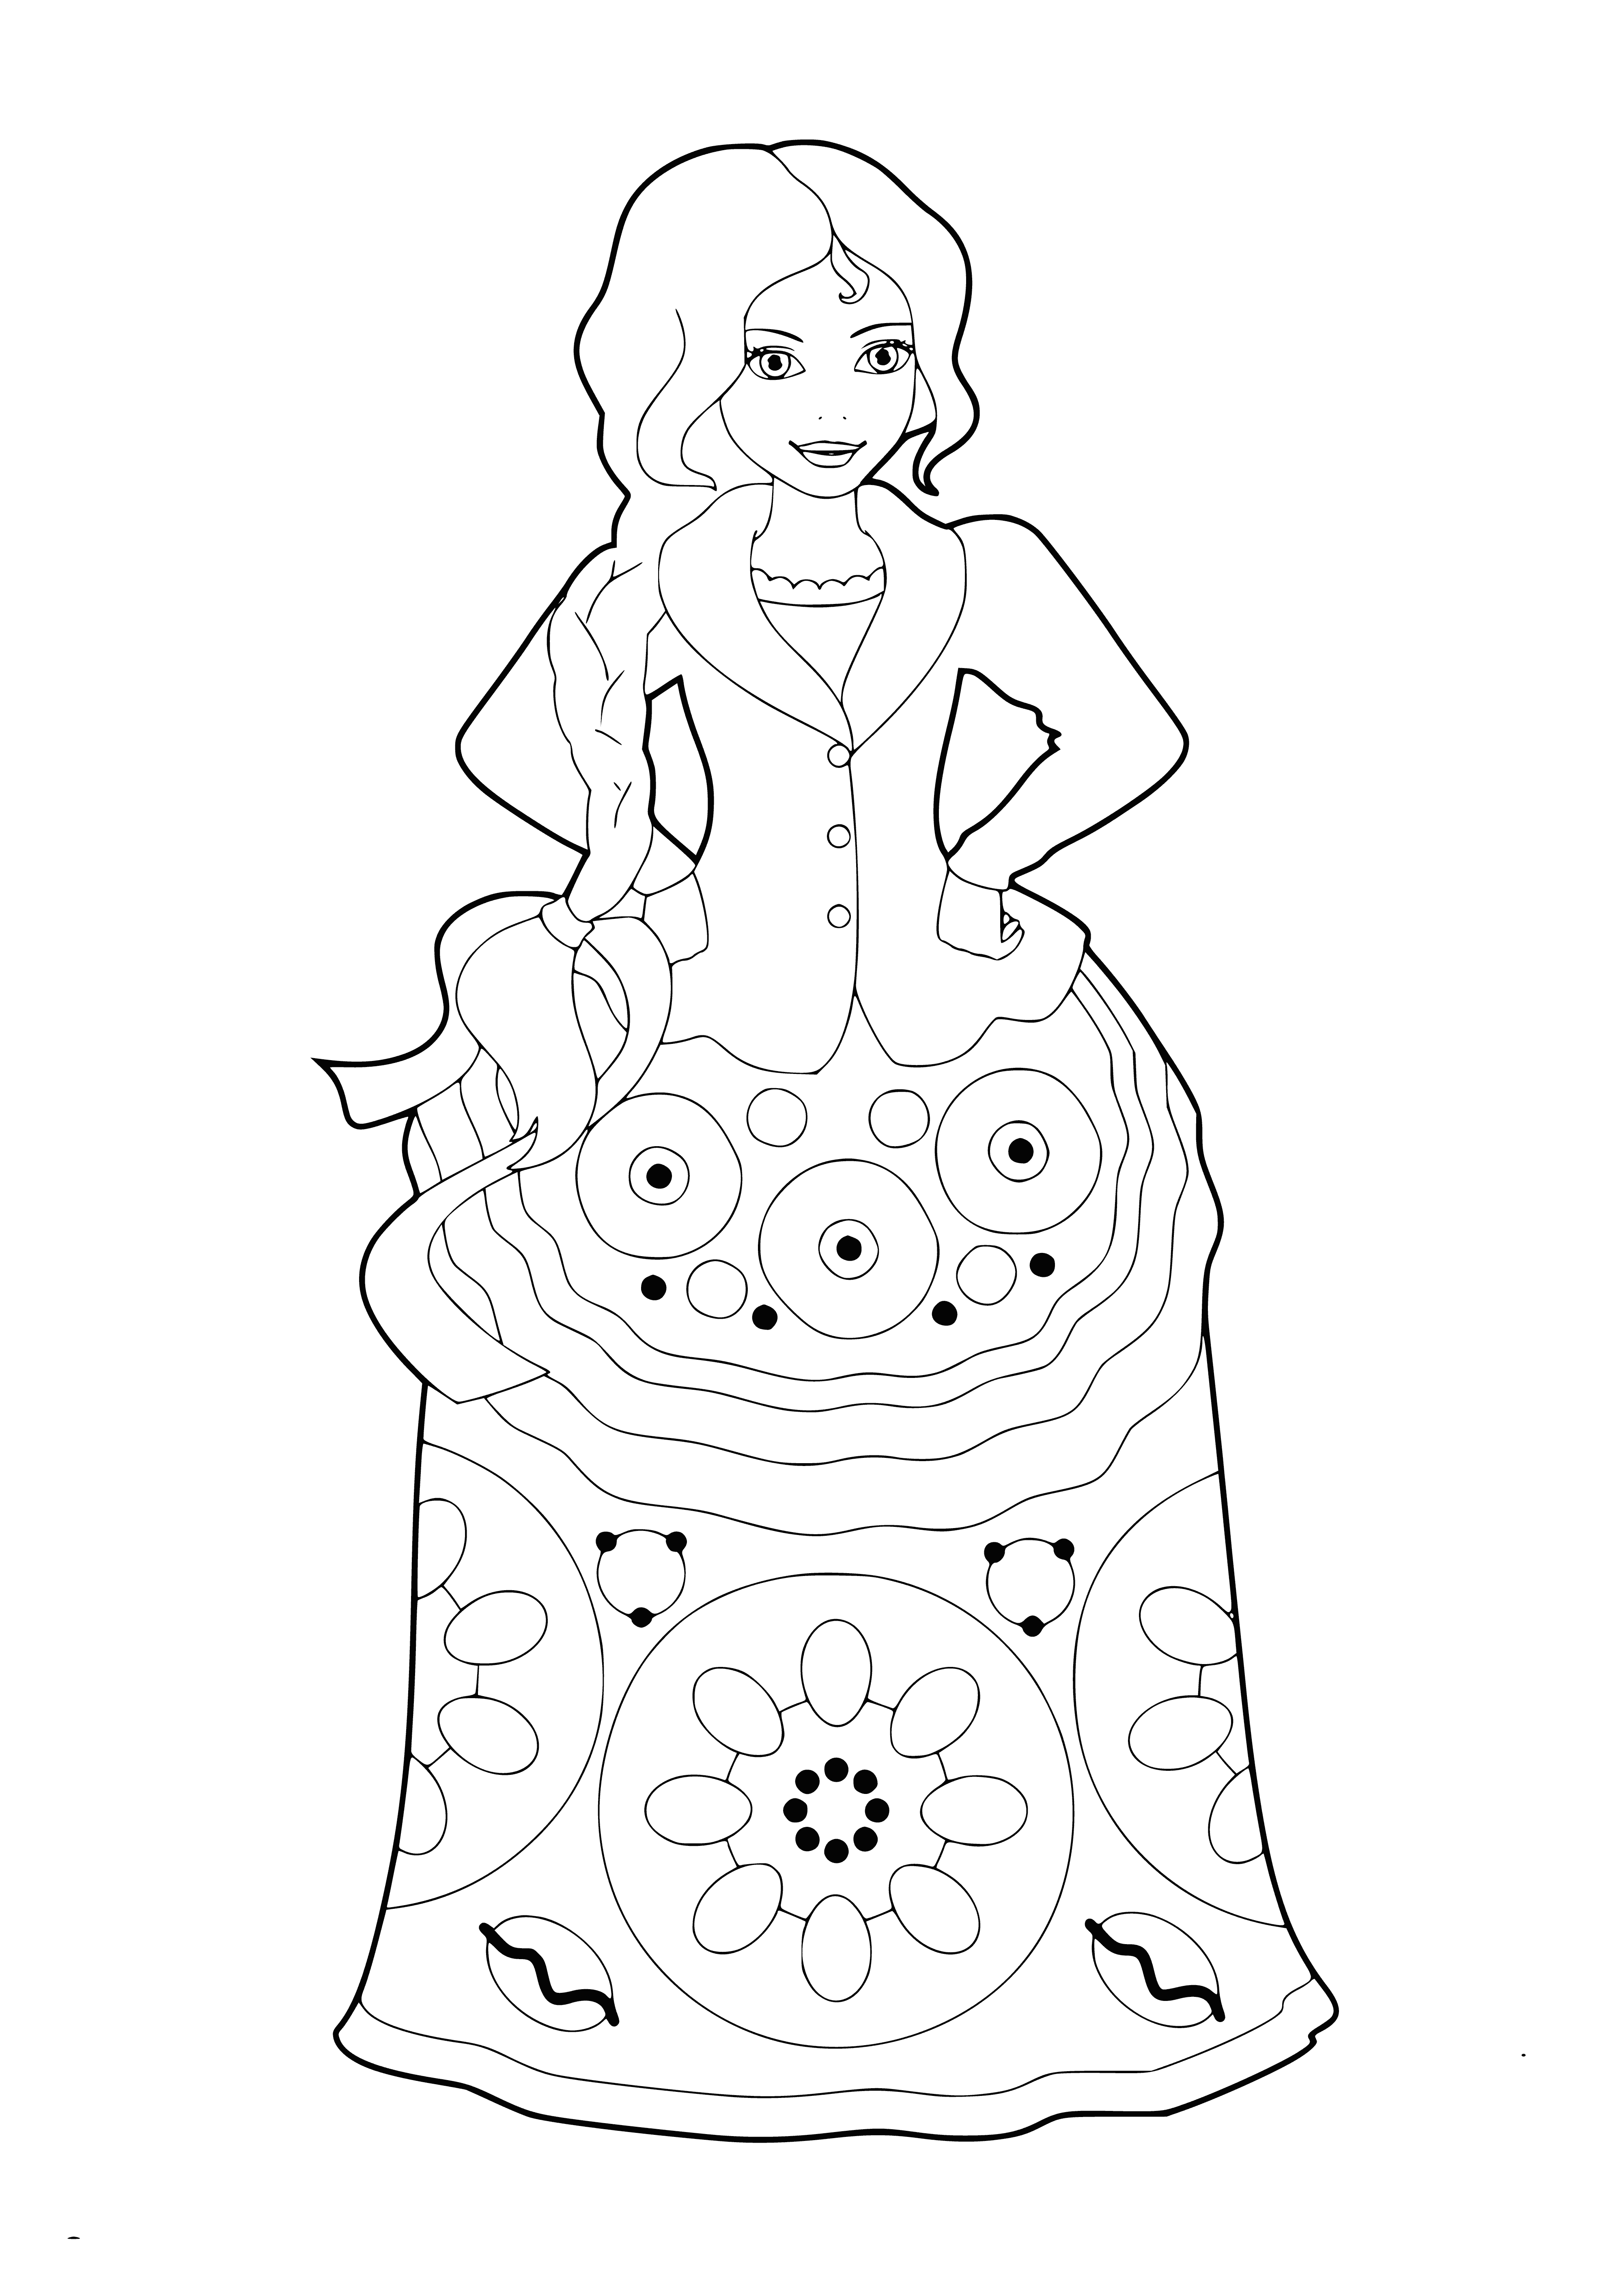 coloring page: Sculpture of young woman nude except for scarf around waist, graciously arm raised, serene expression. #art